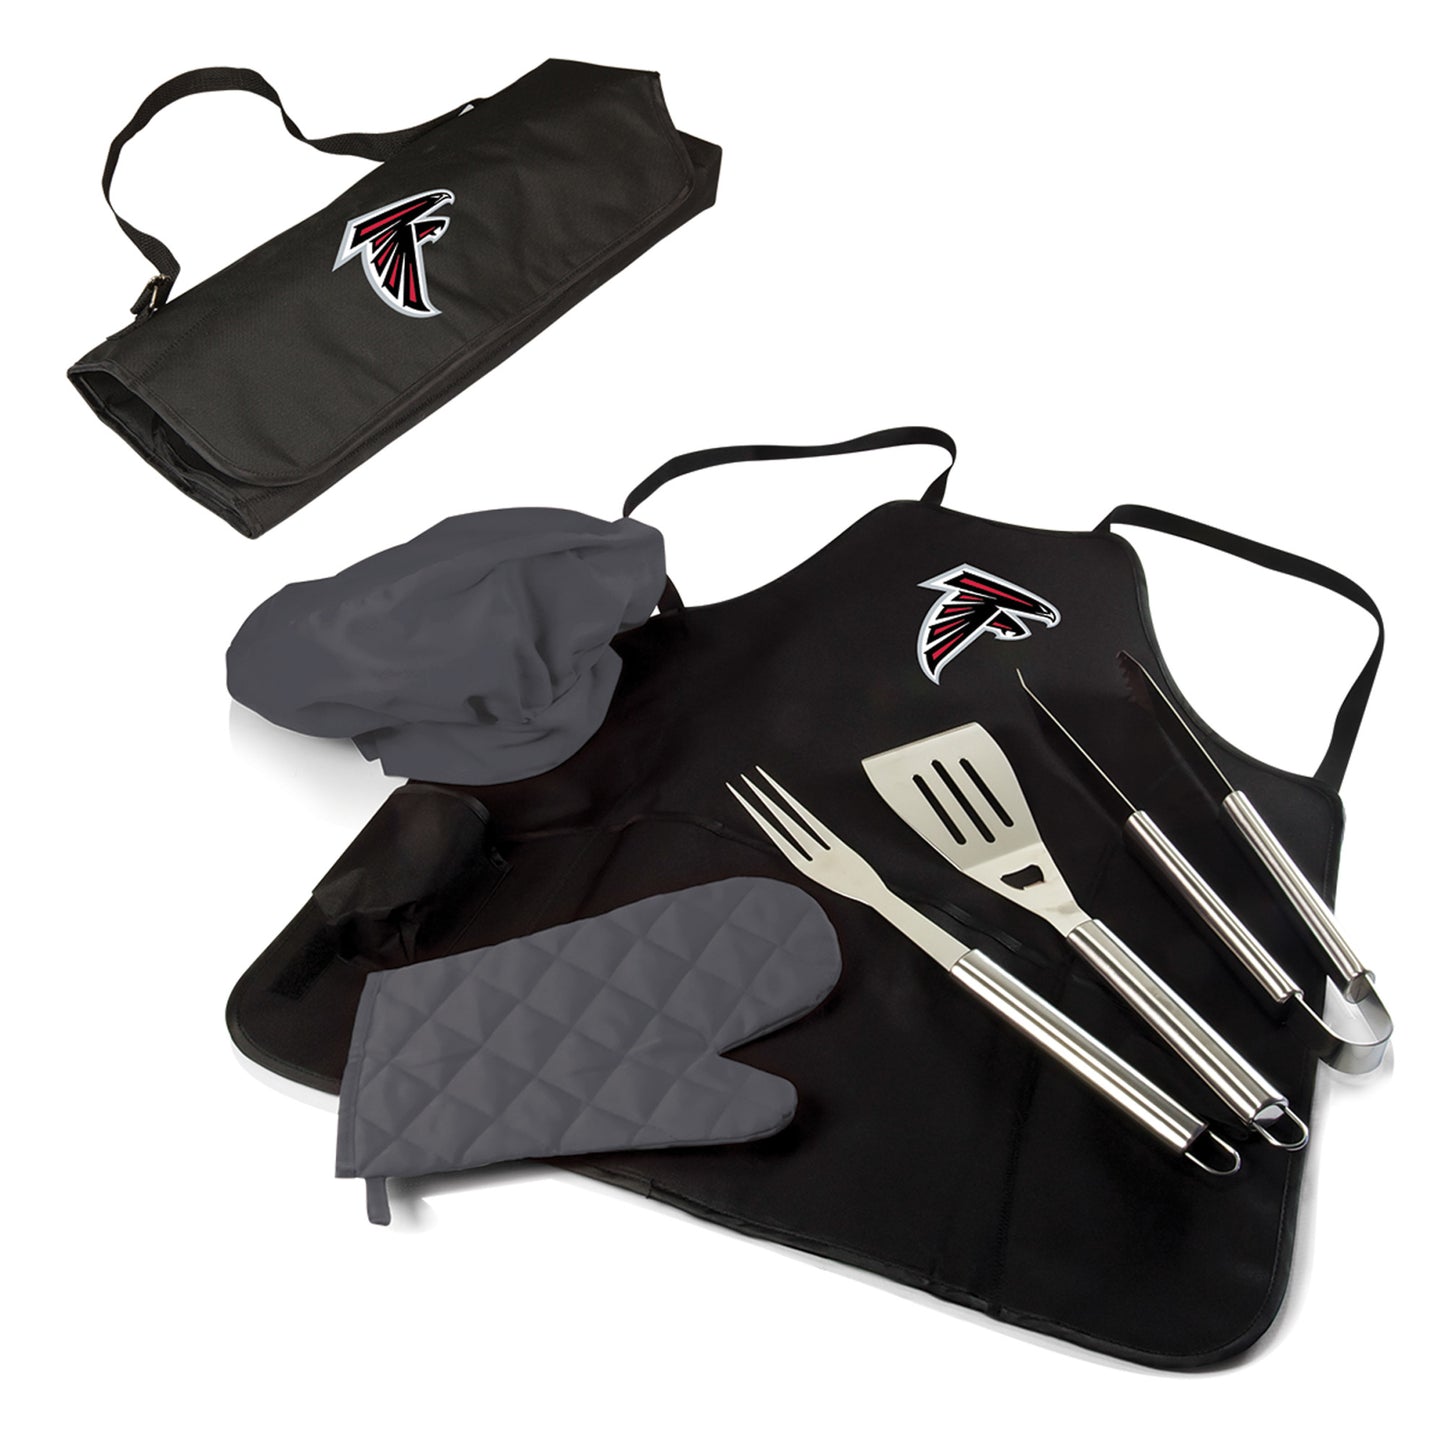 Atlanta Falcons NFL BBQ Apron Tote Pro Grill Set - Durable 600D polyester construction. Converts to a full-sized apron with adjustable straps. Includes stainless steel BBQ spatula, fork, tongs, chef's hat, oven mitt, and instructions. Officially licensed 